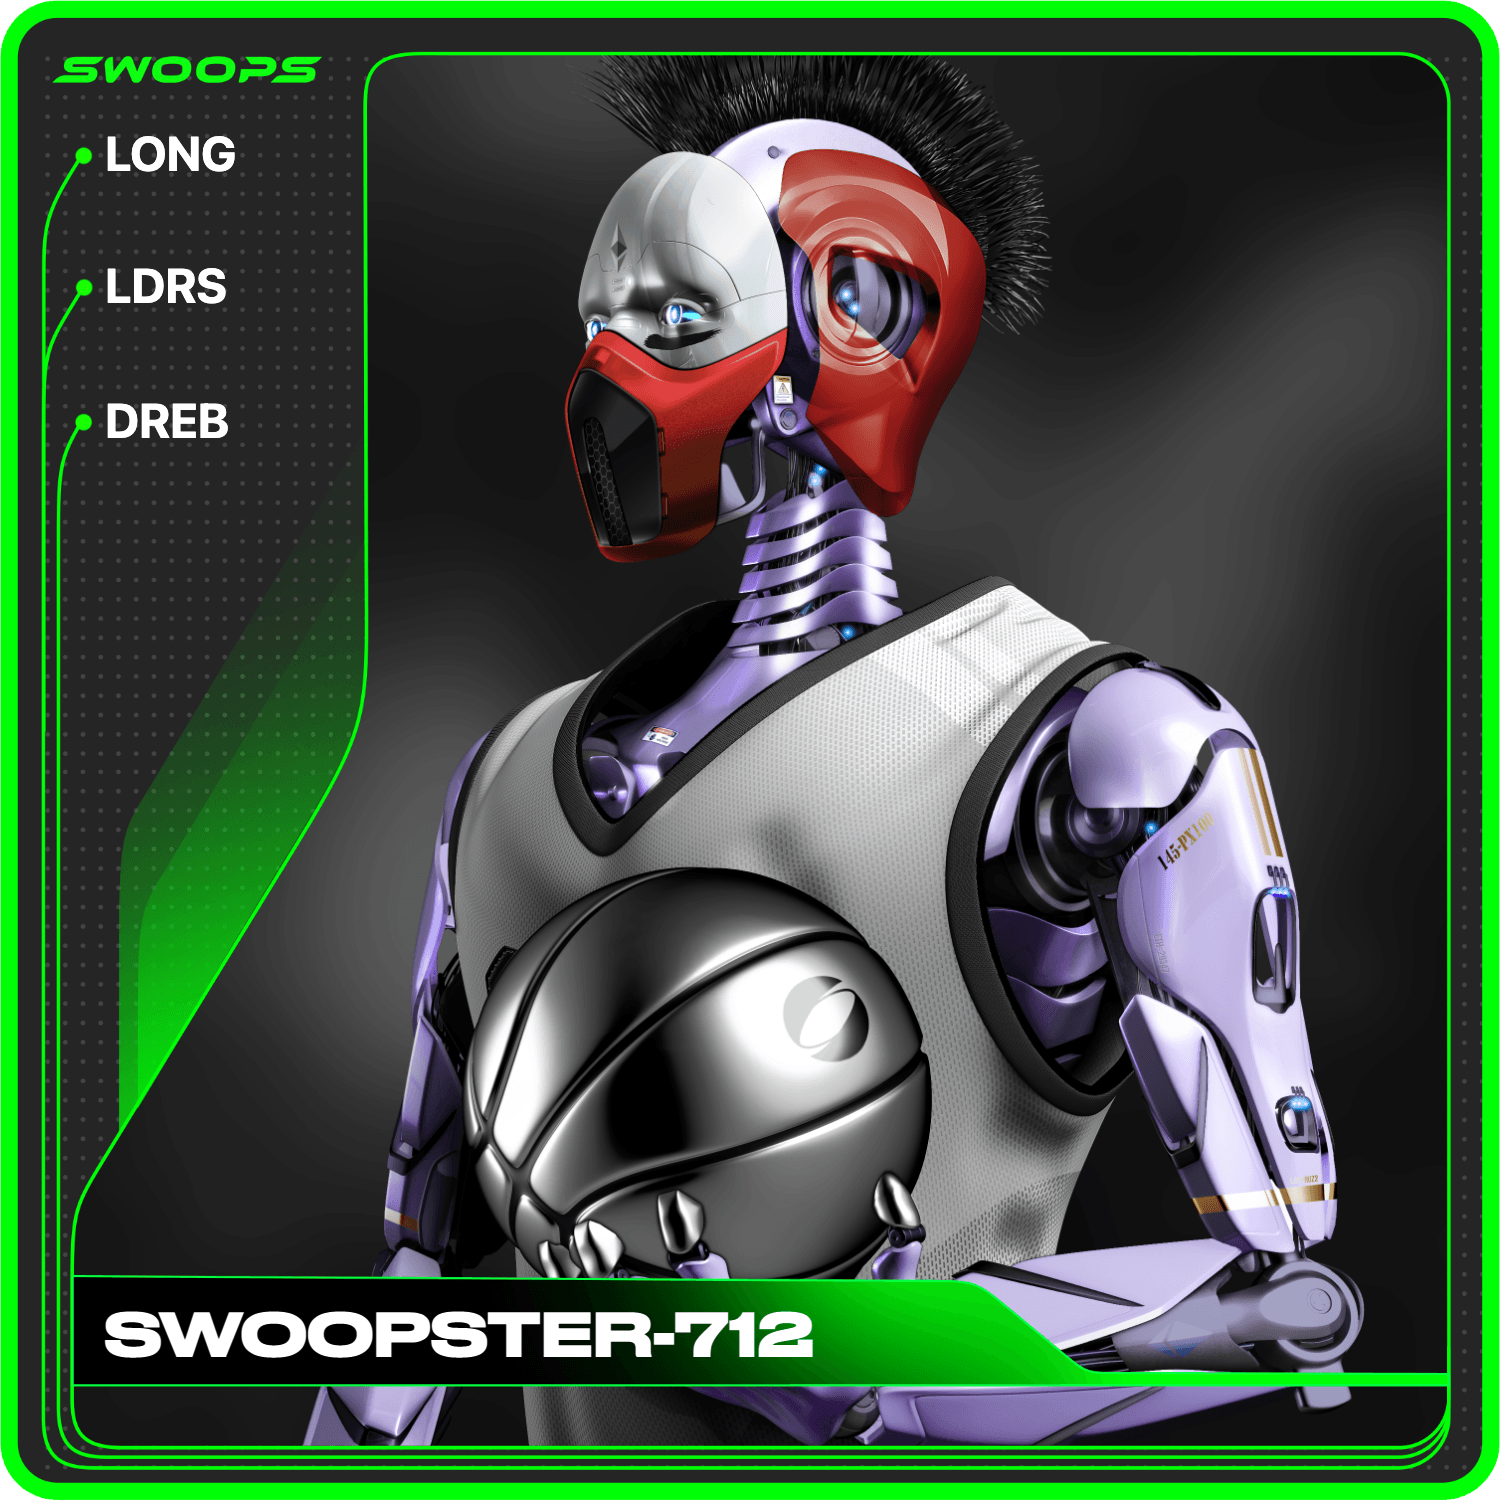 SWOOPSTER-712